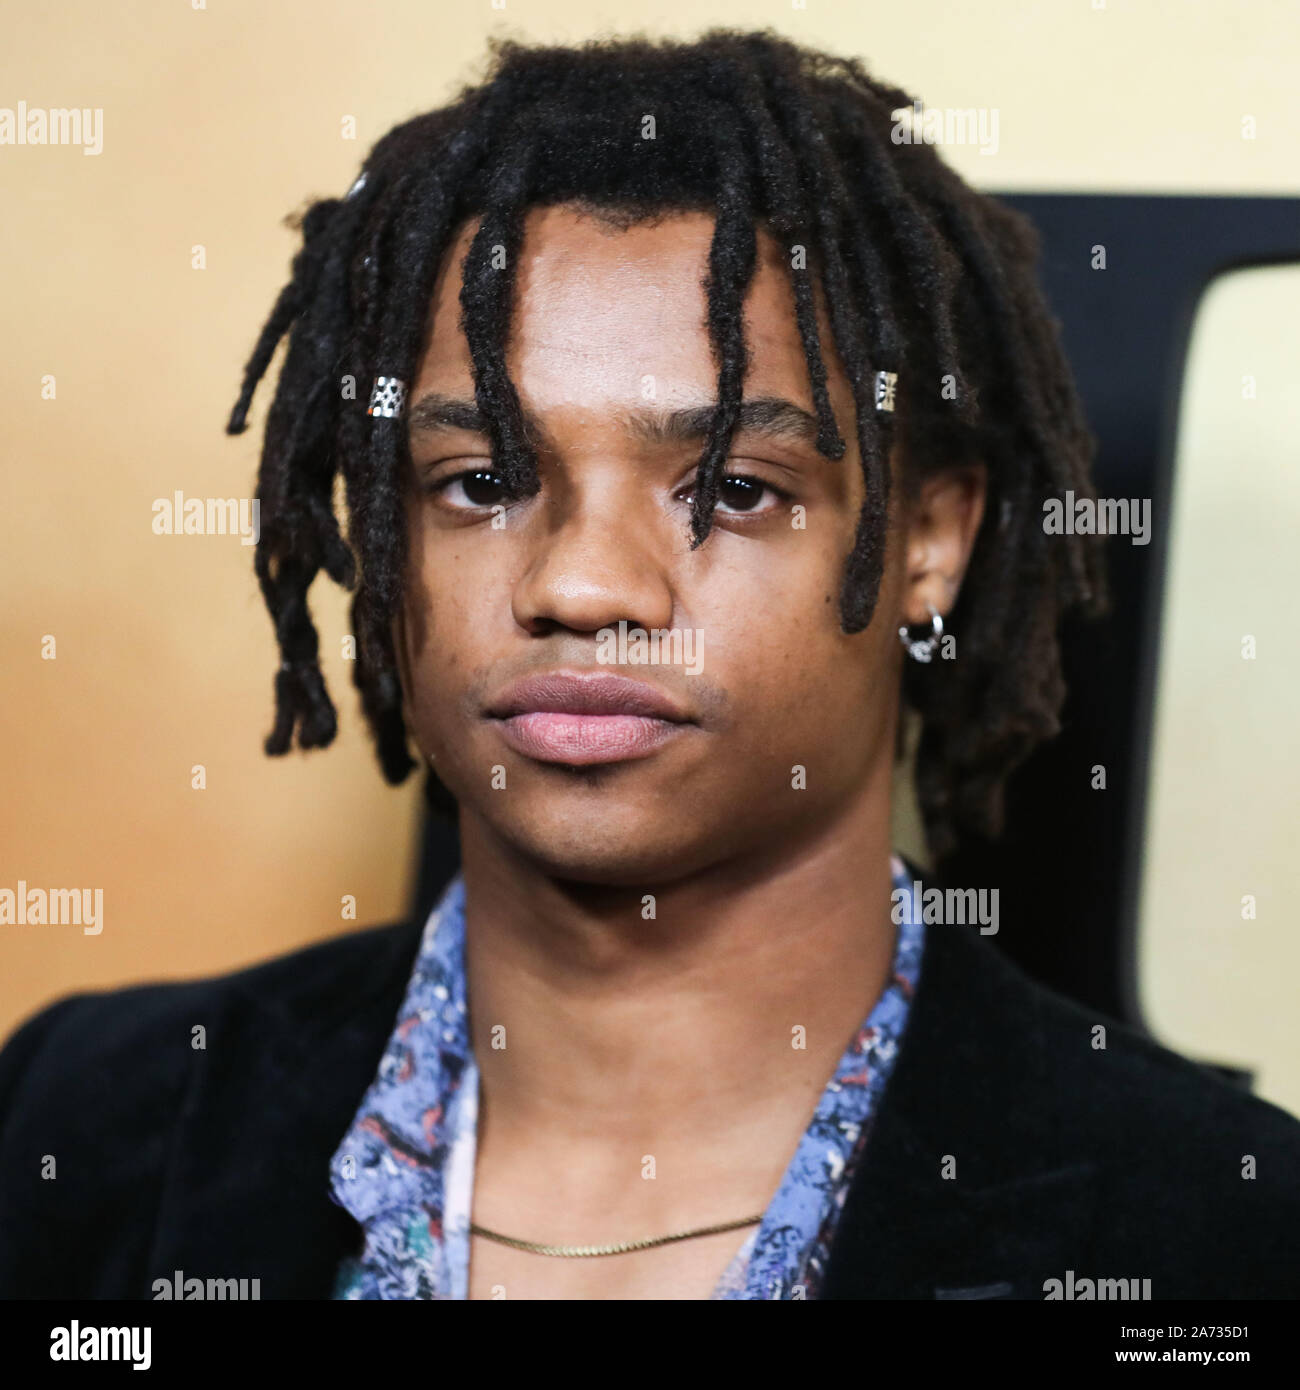 Los Angeles, United States. 29th Oct, 2019. LOS ANGELES, CALIFORNIA, USA - OCTOBER 29: Actor Henry Hunter Hall arrives at the Los Angeles Premiere Of Focus Features' 'Harriet' held at The Orpheum Theatre on October 29, 2019 in Los Angeles, California, United States. (Photo by Xavier Collin/Image Press Agency) Credit: Image Press Agency/Alamy Live News Stock Photo